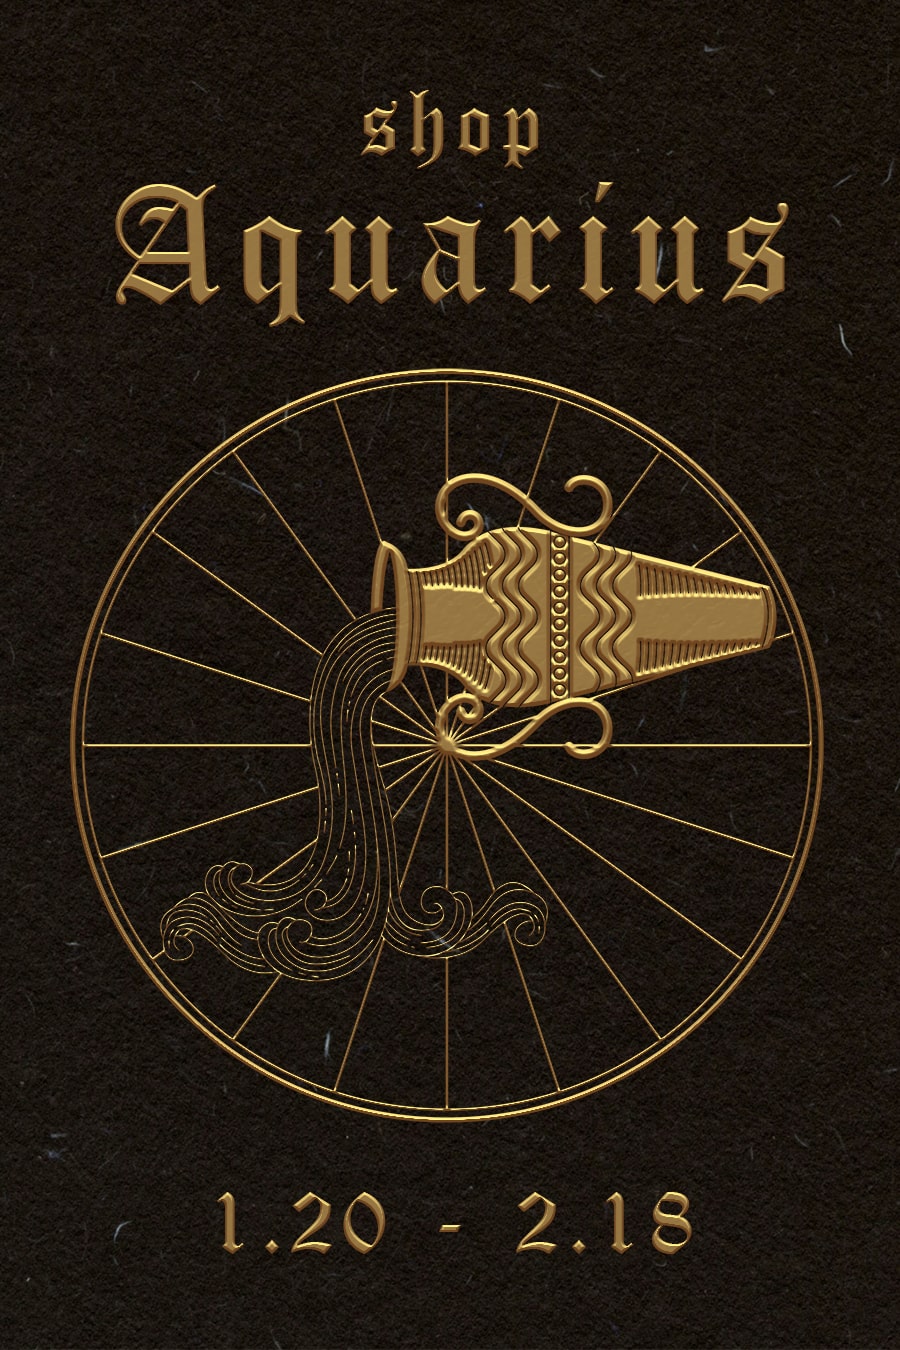 Aquarius Apparel, Jewelry, and Gifts